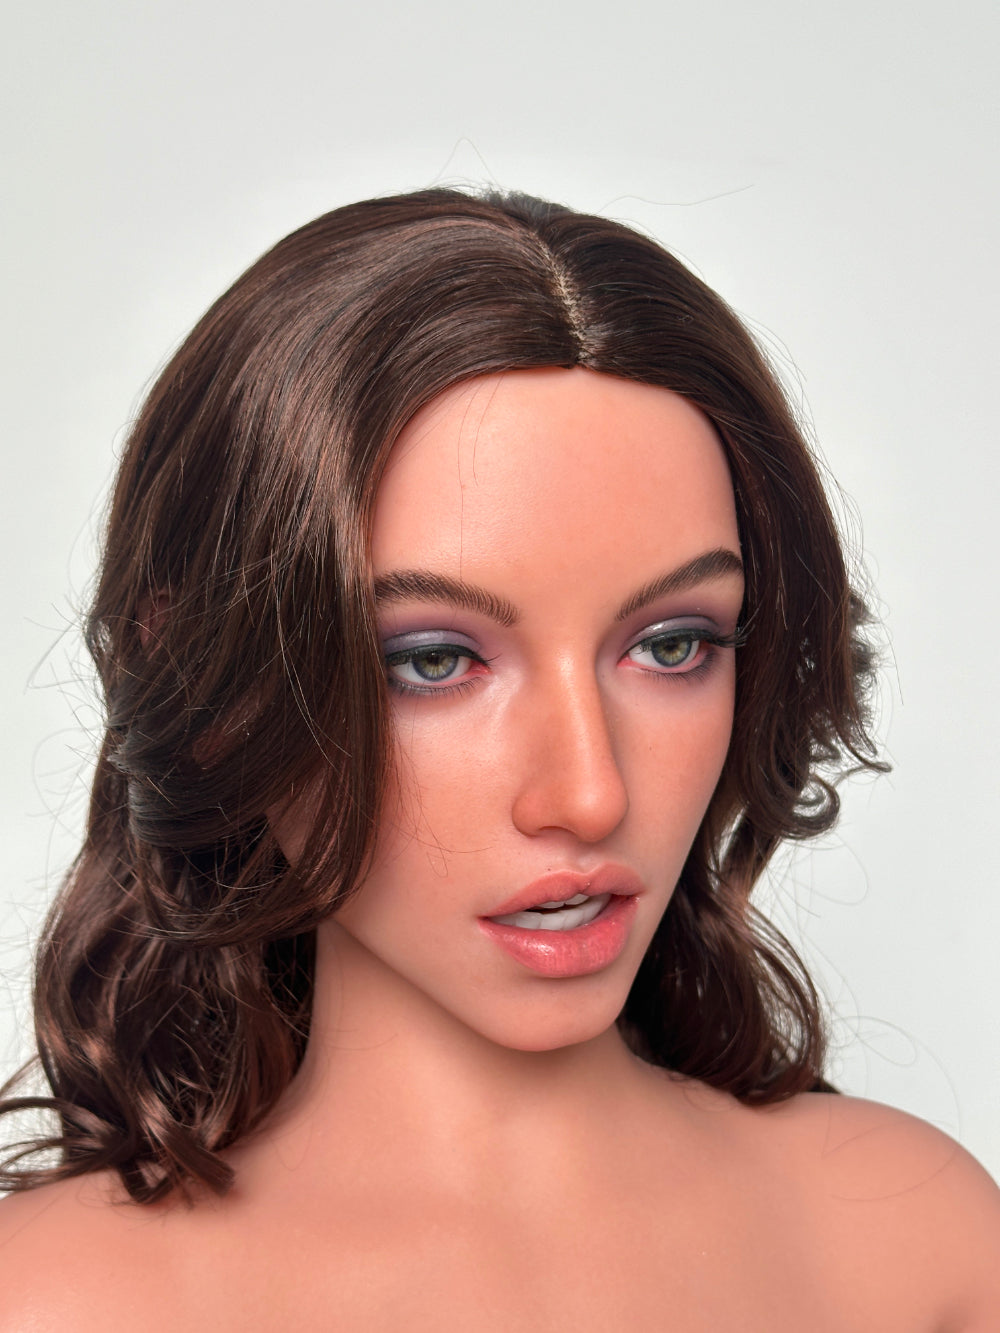 Zelex Doll SLE Series 165 cm D Silicone - ZXE216-3 Movable Jaw